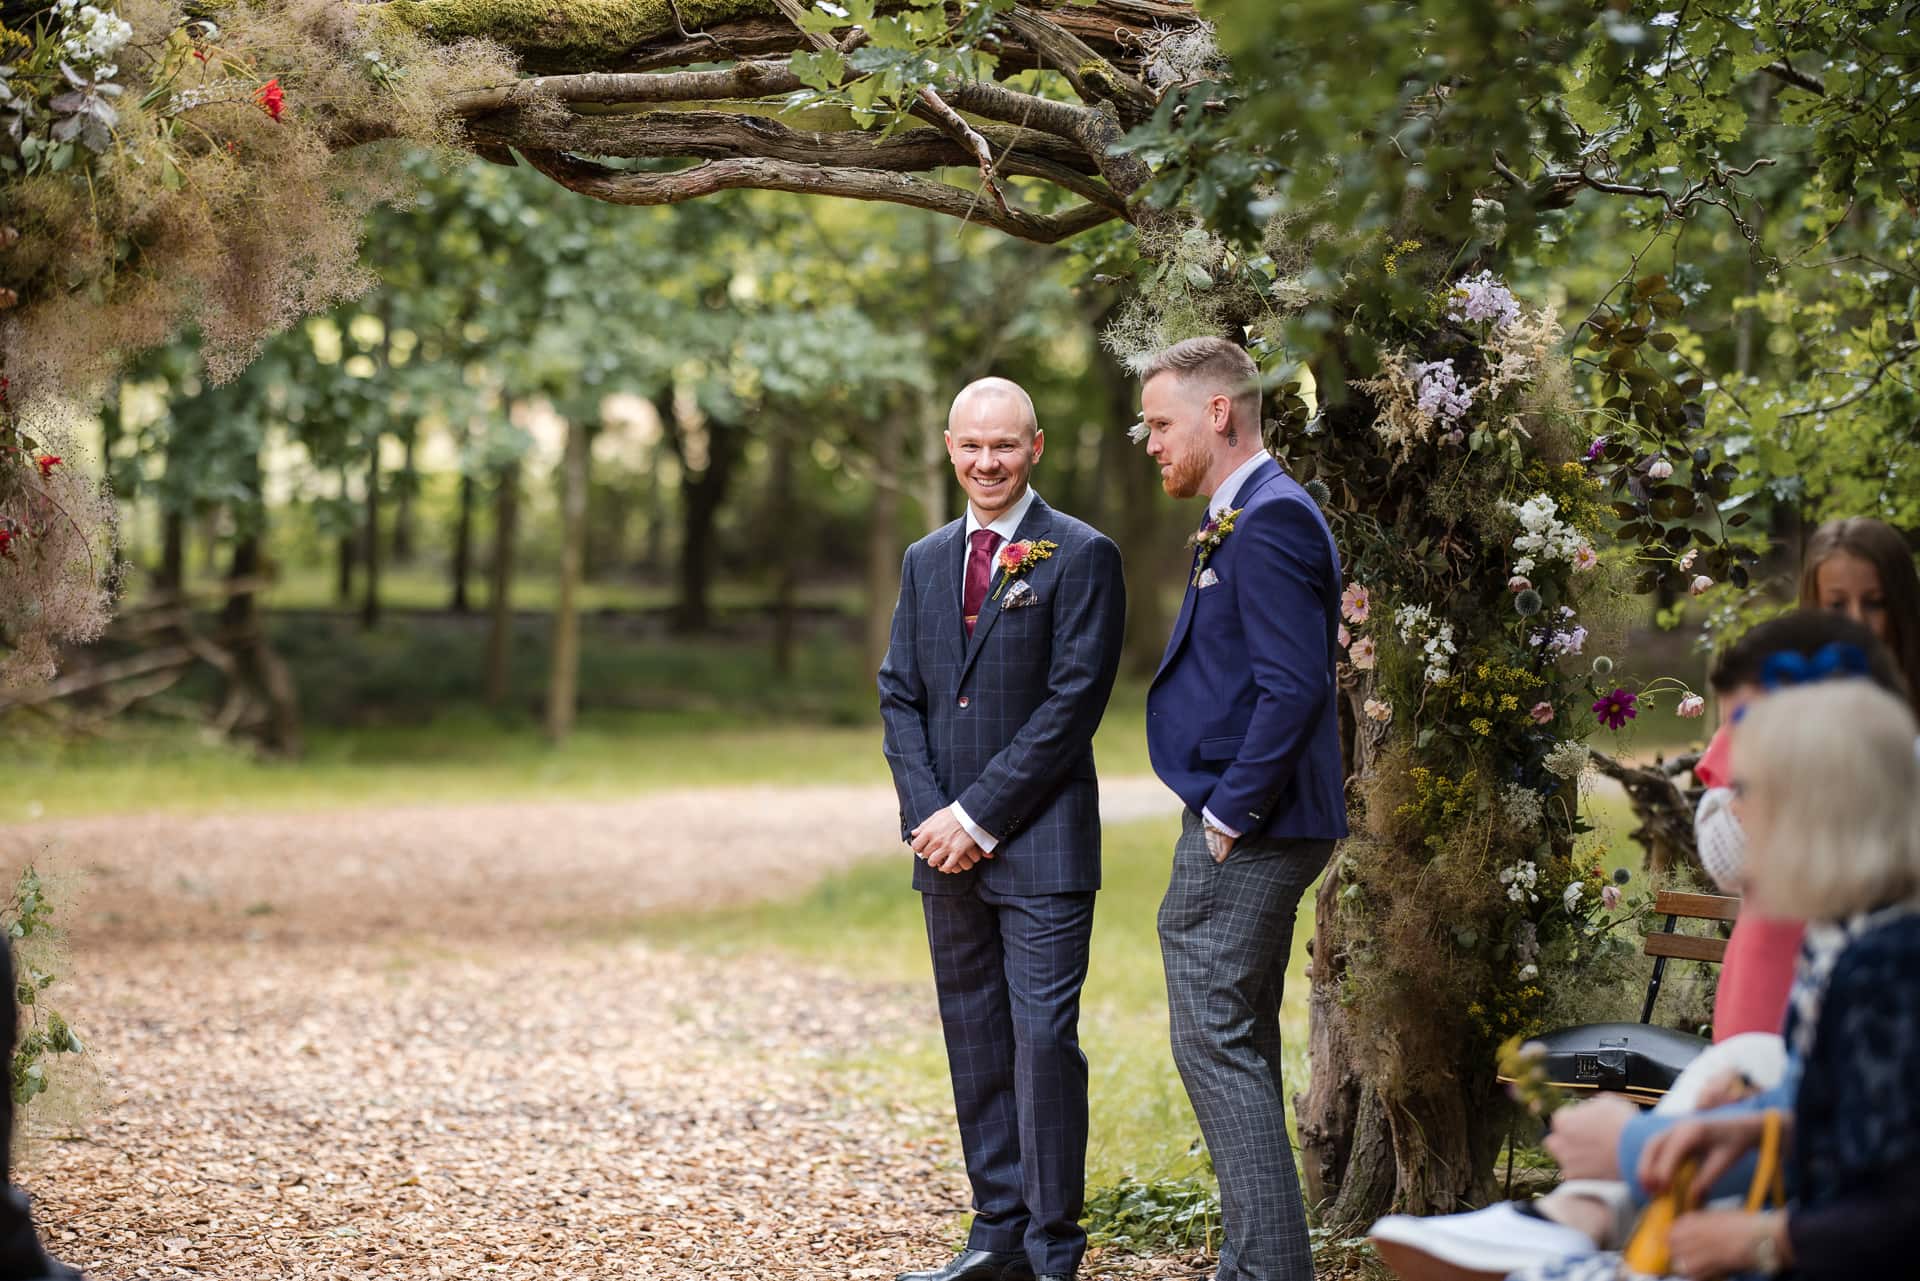 Groom and Best man chatting at the outdoor wedding ceremony